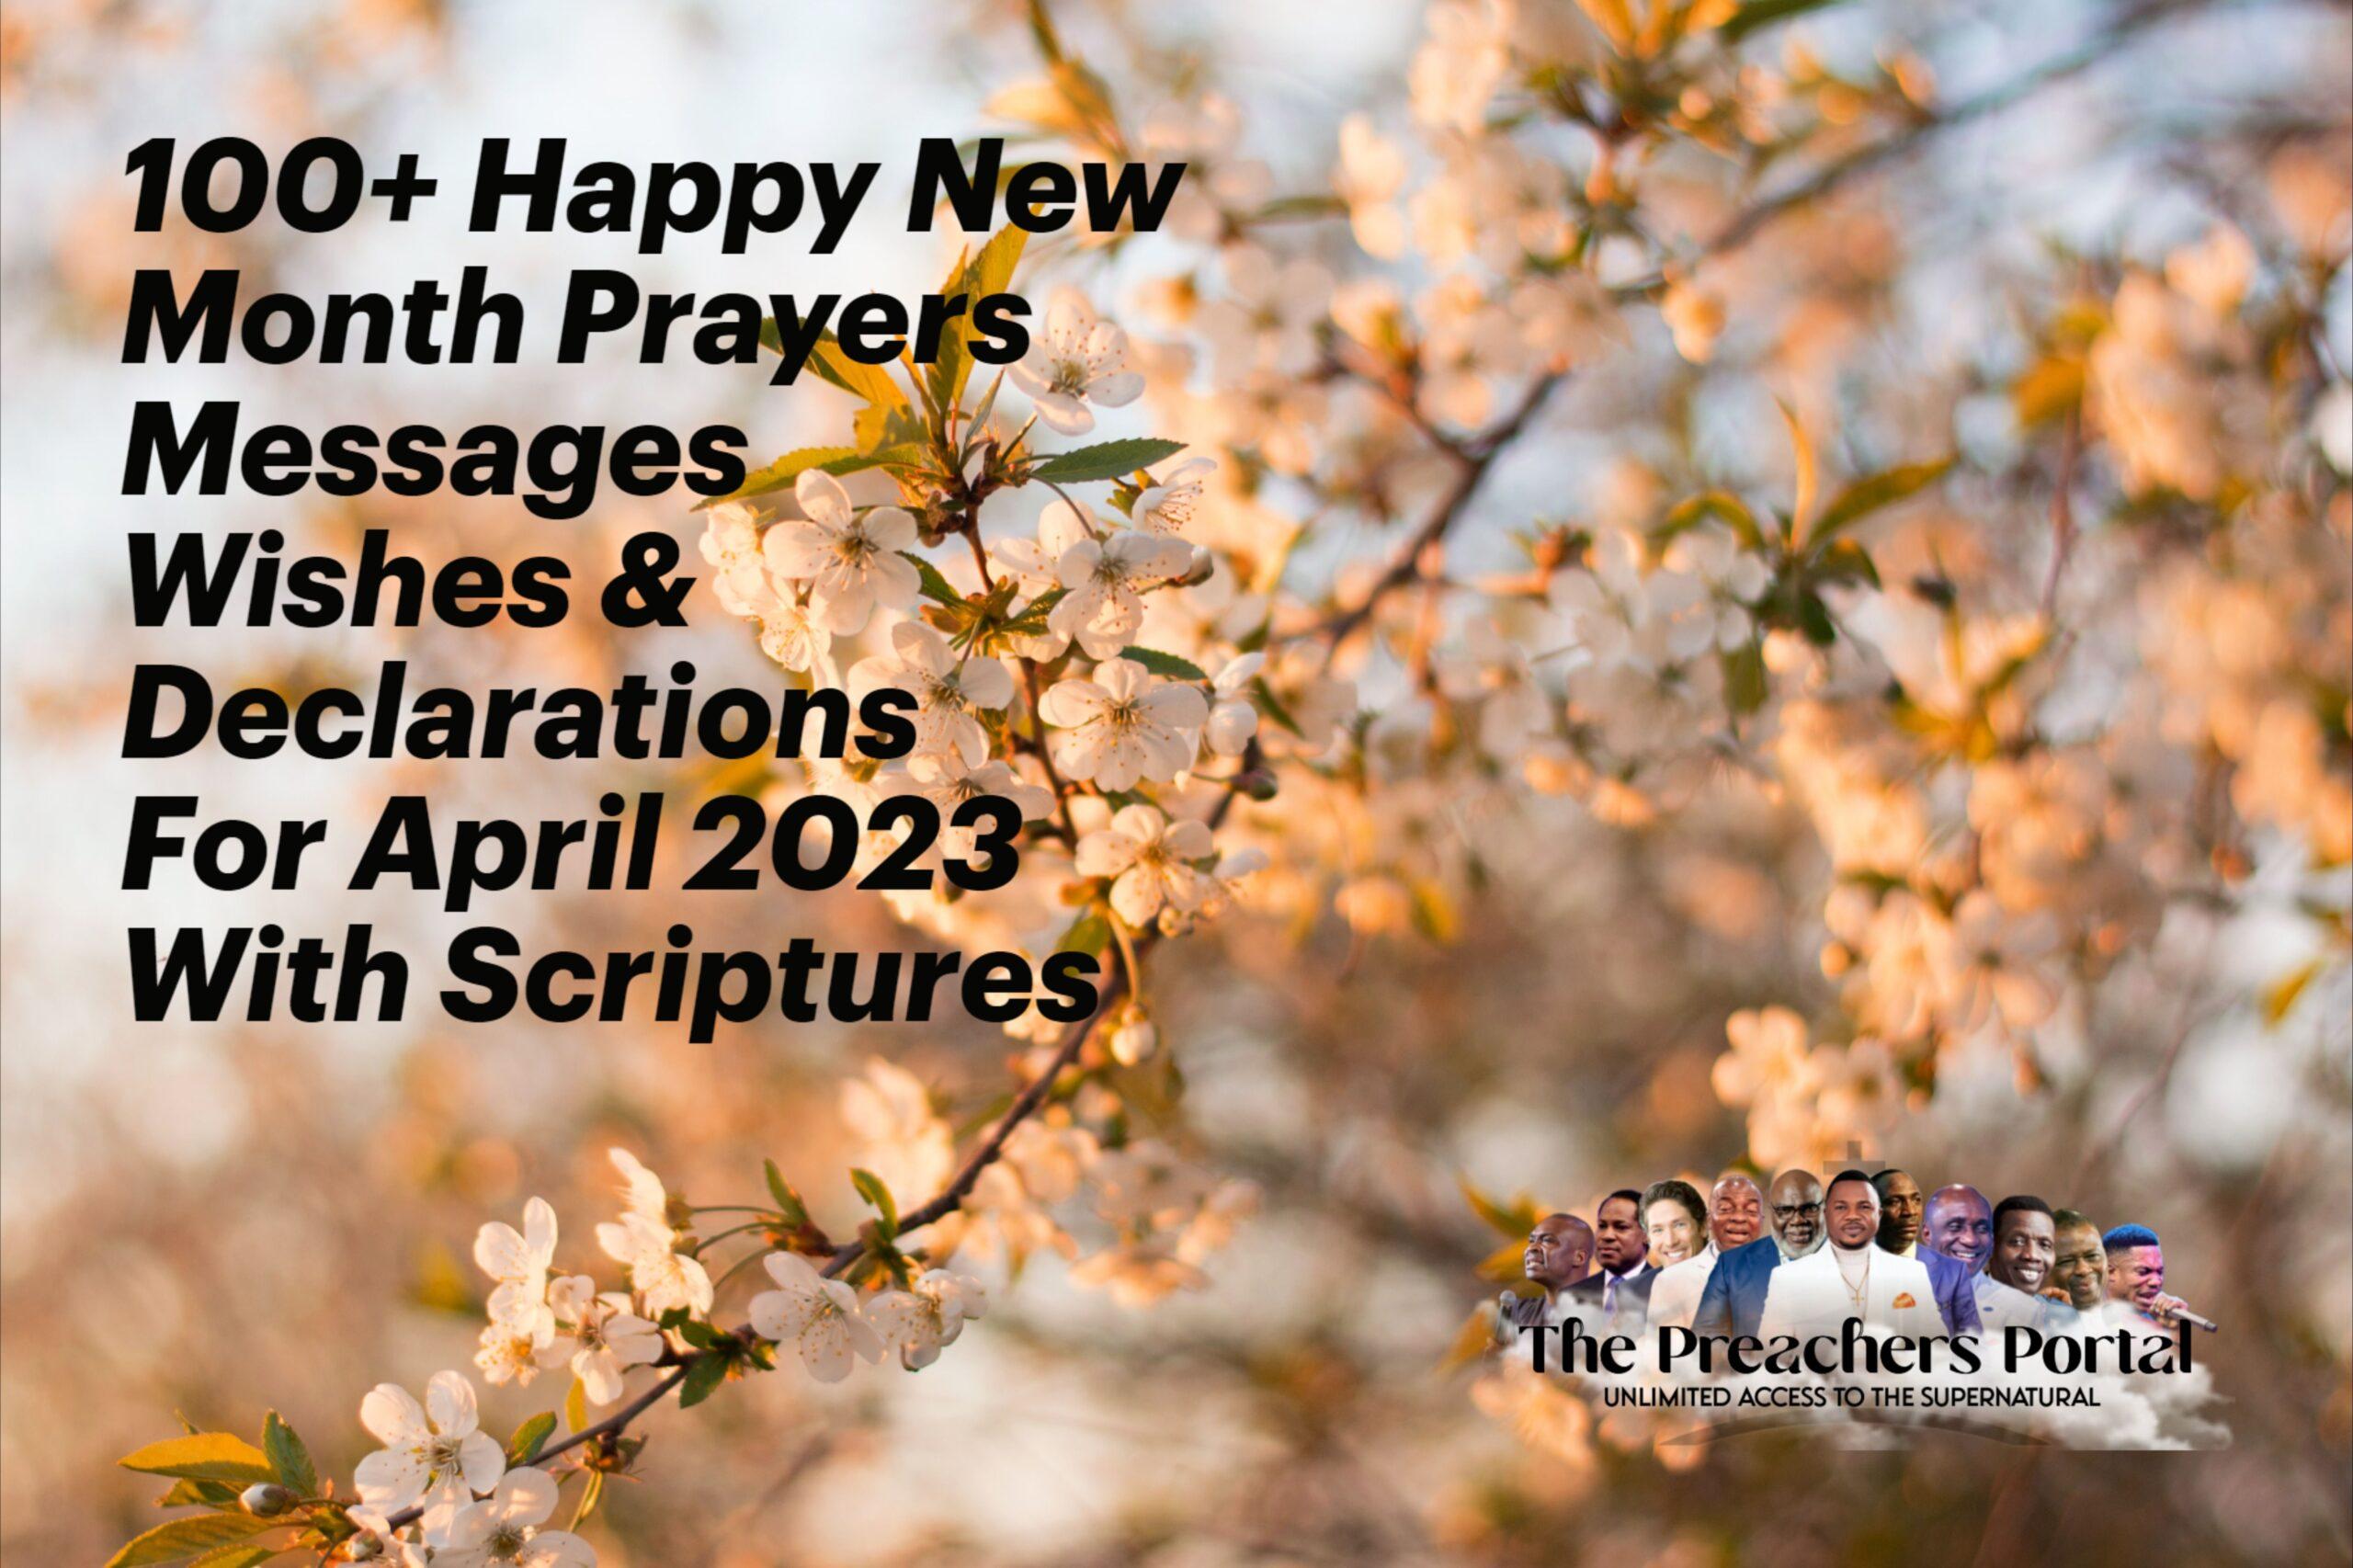 100+ Happy New Month Prayers Messages Wishes & Declarations For April 2023 With Scriptures